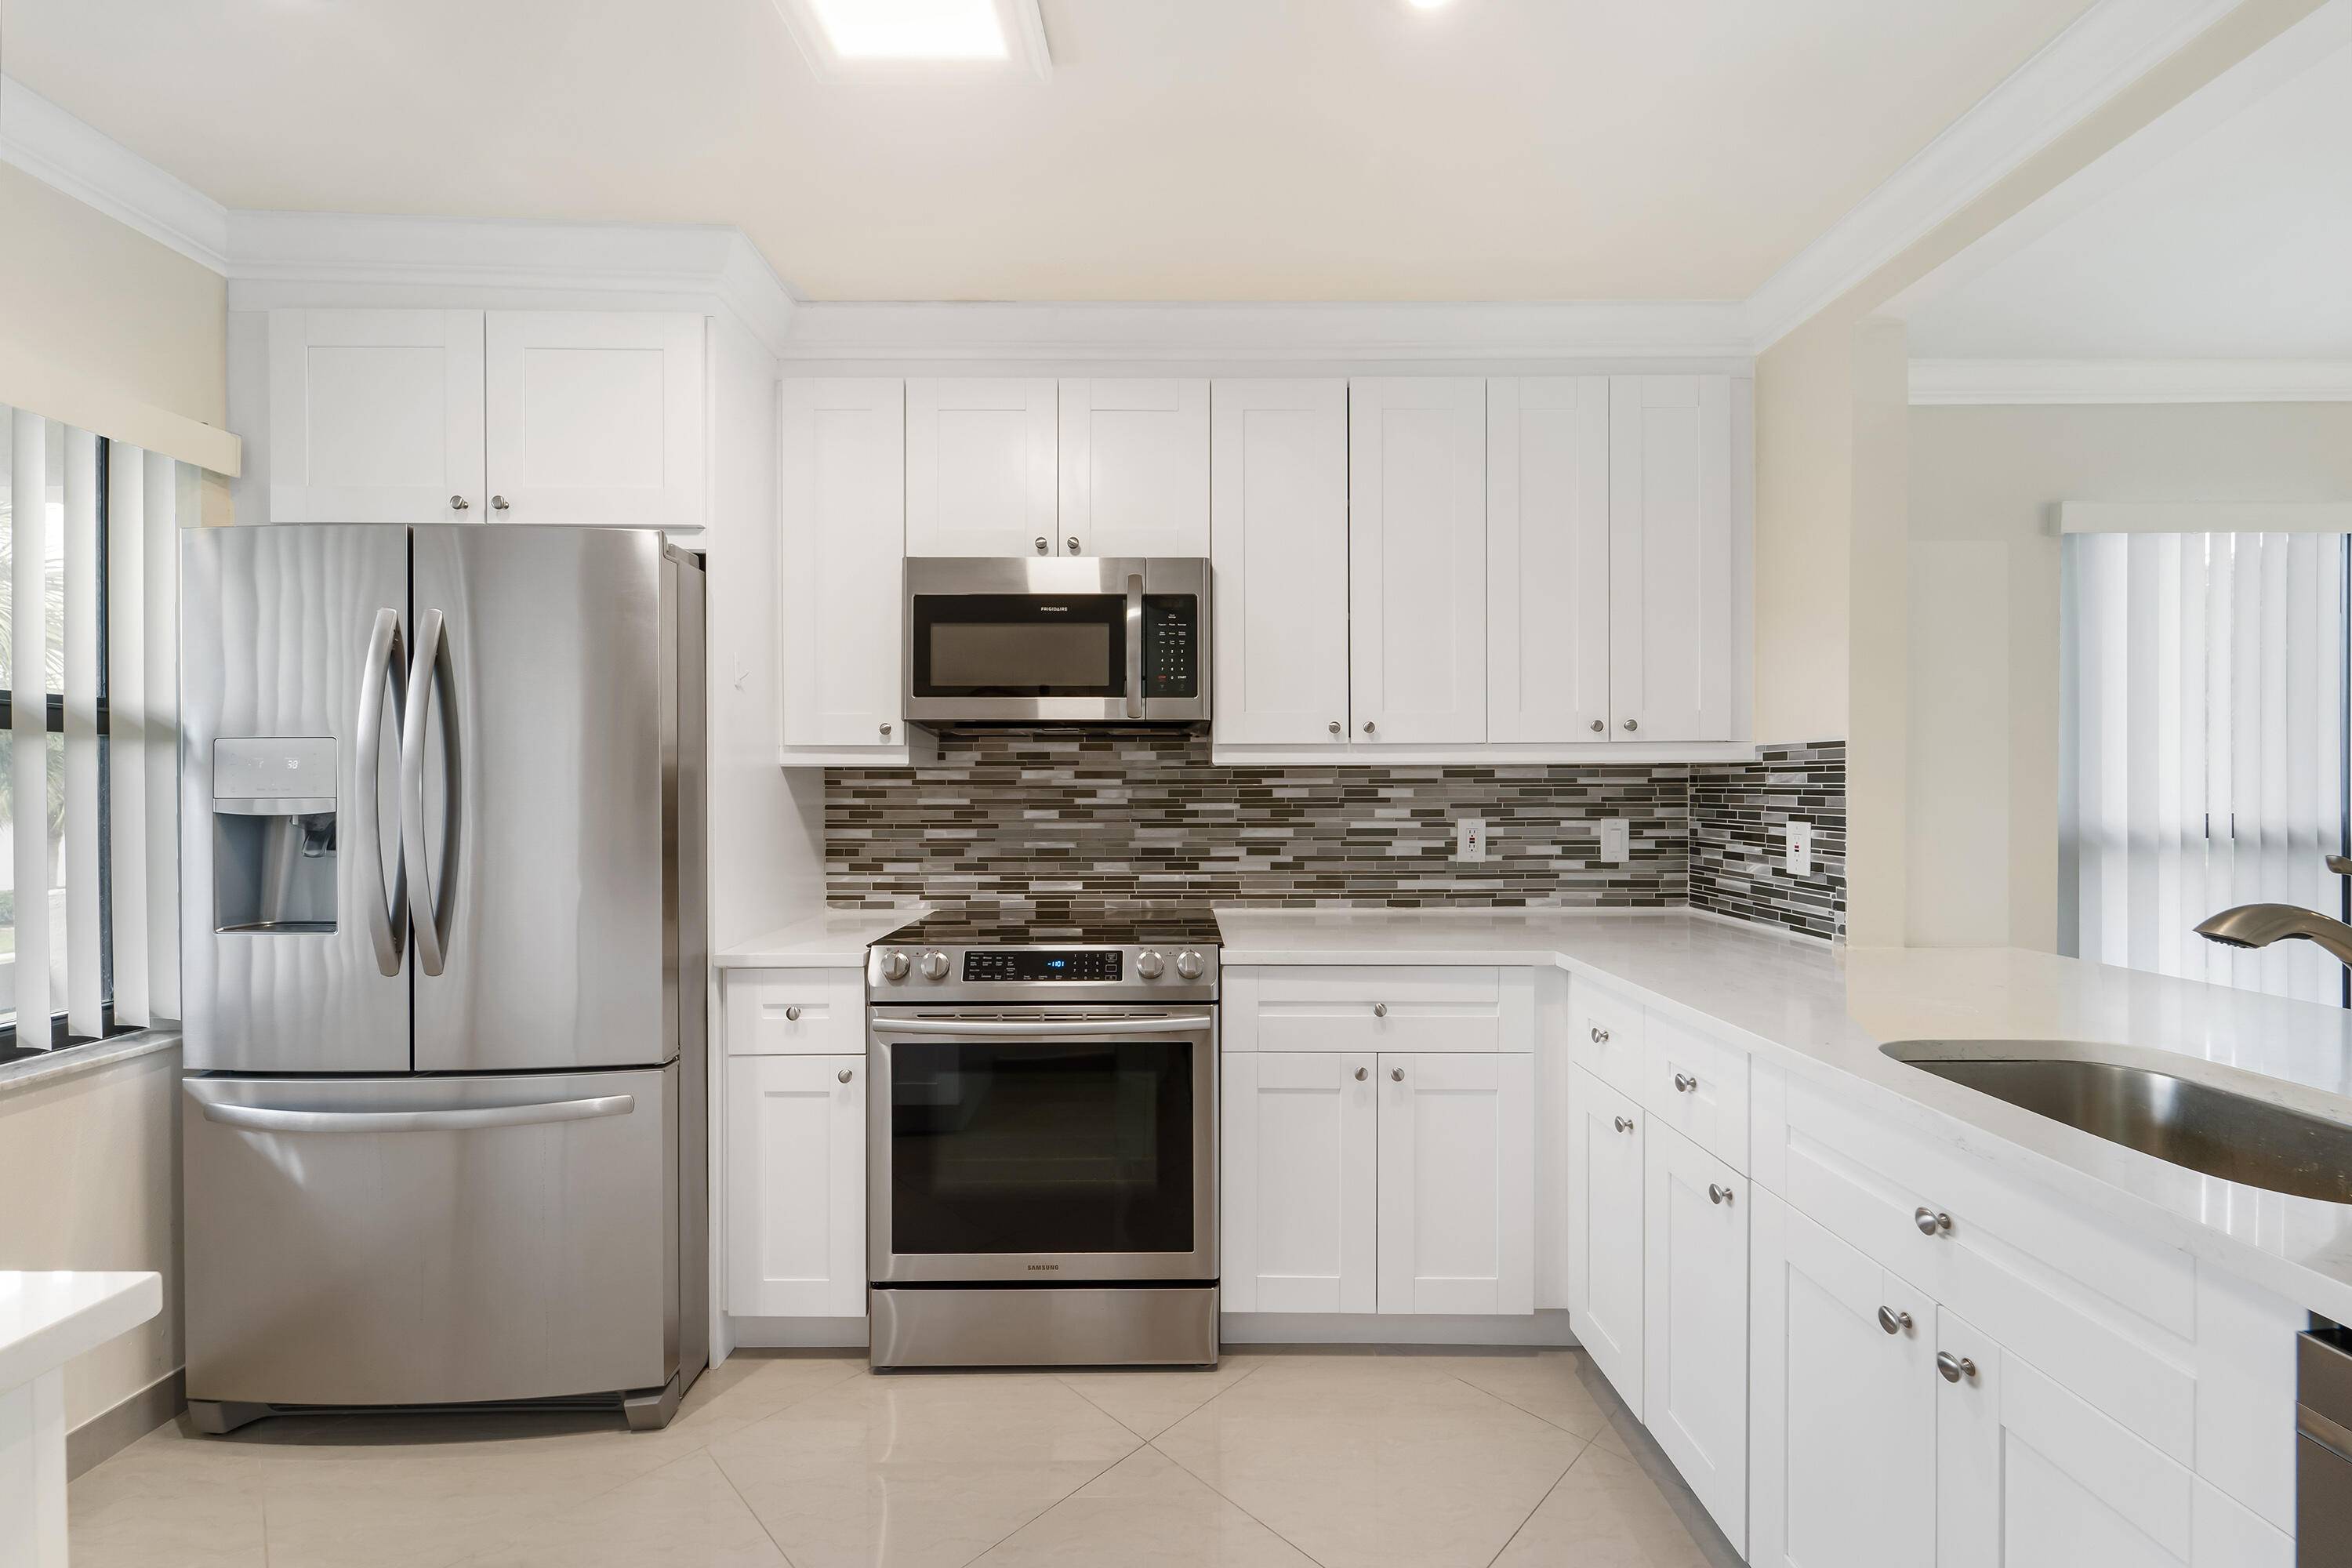 STUNNING UPGRADES ! COMPLETE IMPACT WINDOWS, NEW ROOF 2022, NEW 2022 whirlpool dishwasher, NEWER 2018 stainless Frigidaire refrigerator, oven microwave.